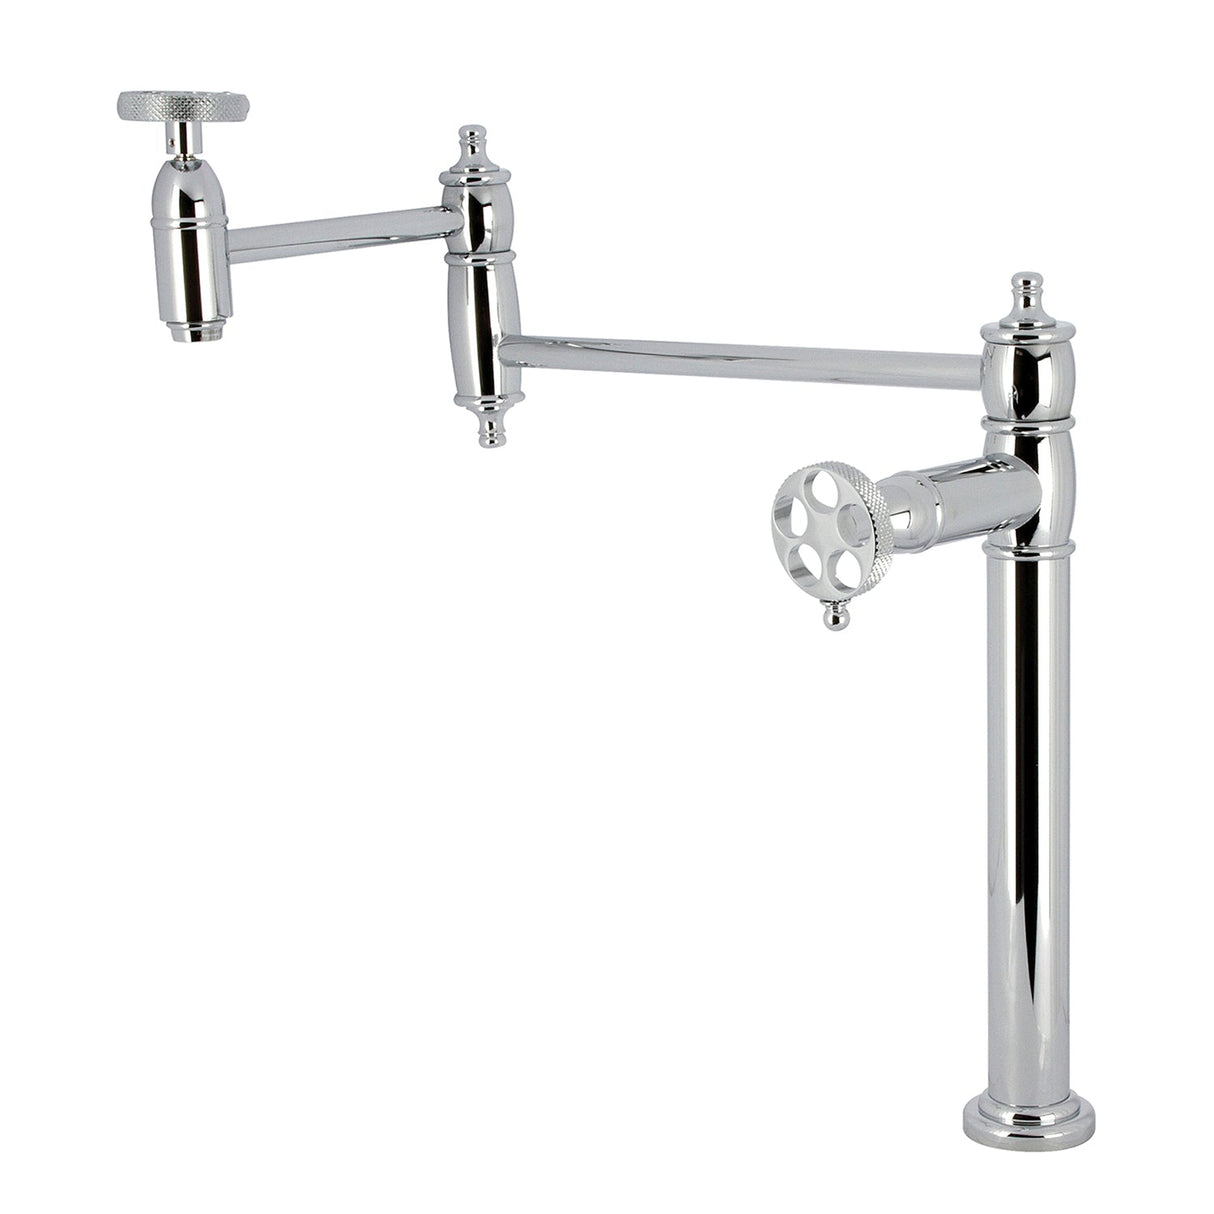 Webb KS3701RKX Two-Handle 1-Hole Deck Mount Pot Filler Faucet with Knurled Handle, Polished Chrome